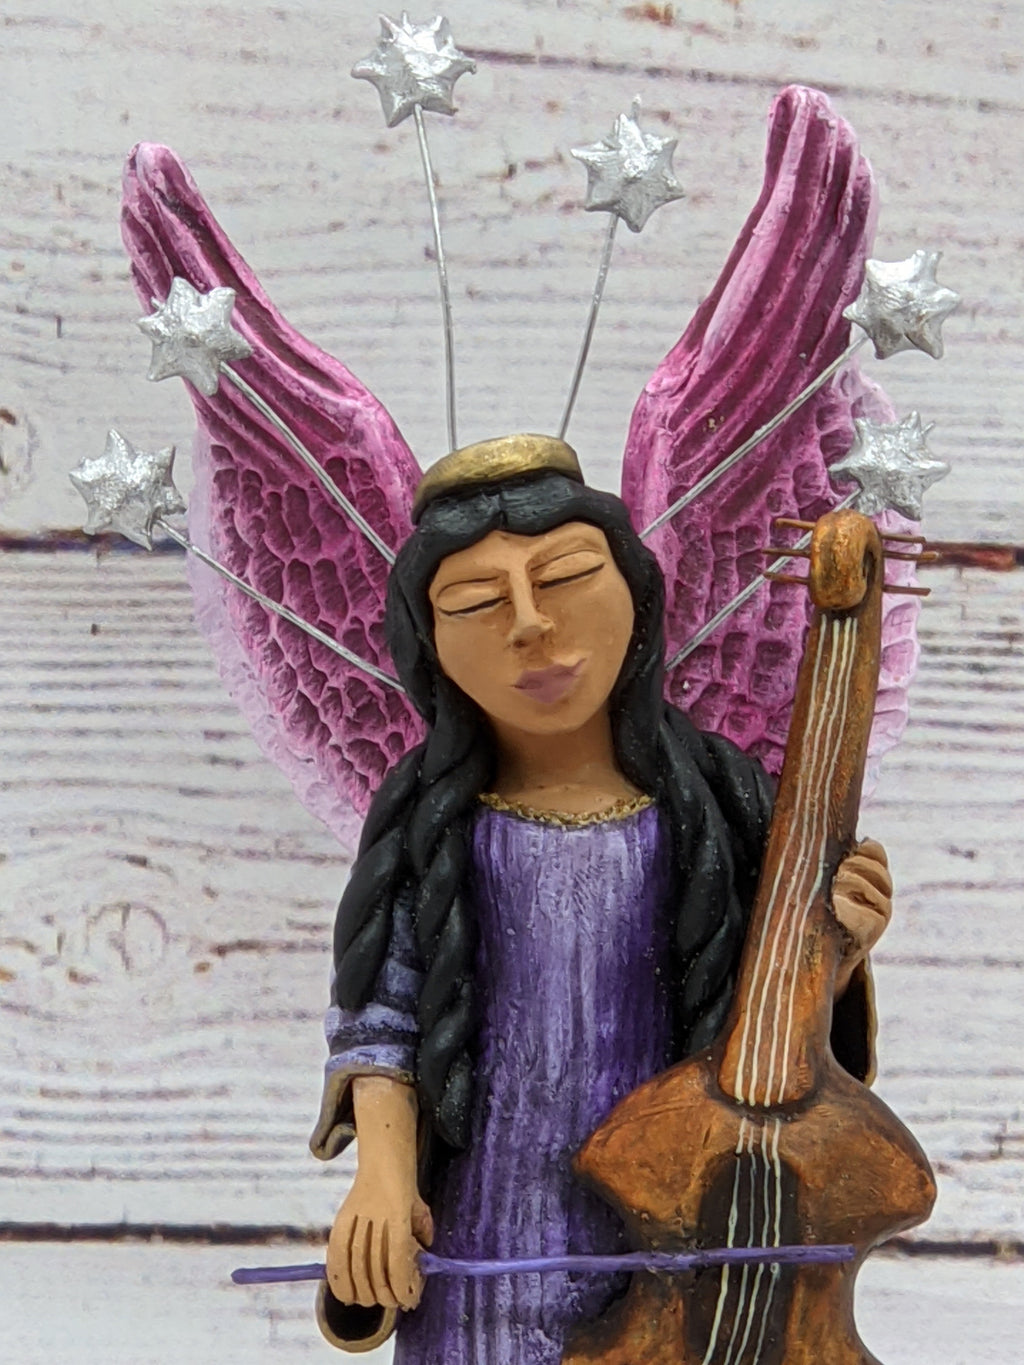 Christmas Decorations, Angel with Cello, Christmas Angel Home Decor, Handmade Angel Art from Oaxaca Mexico, Original Sculpture